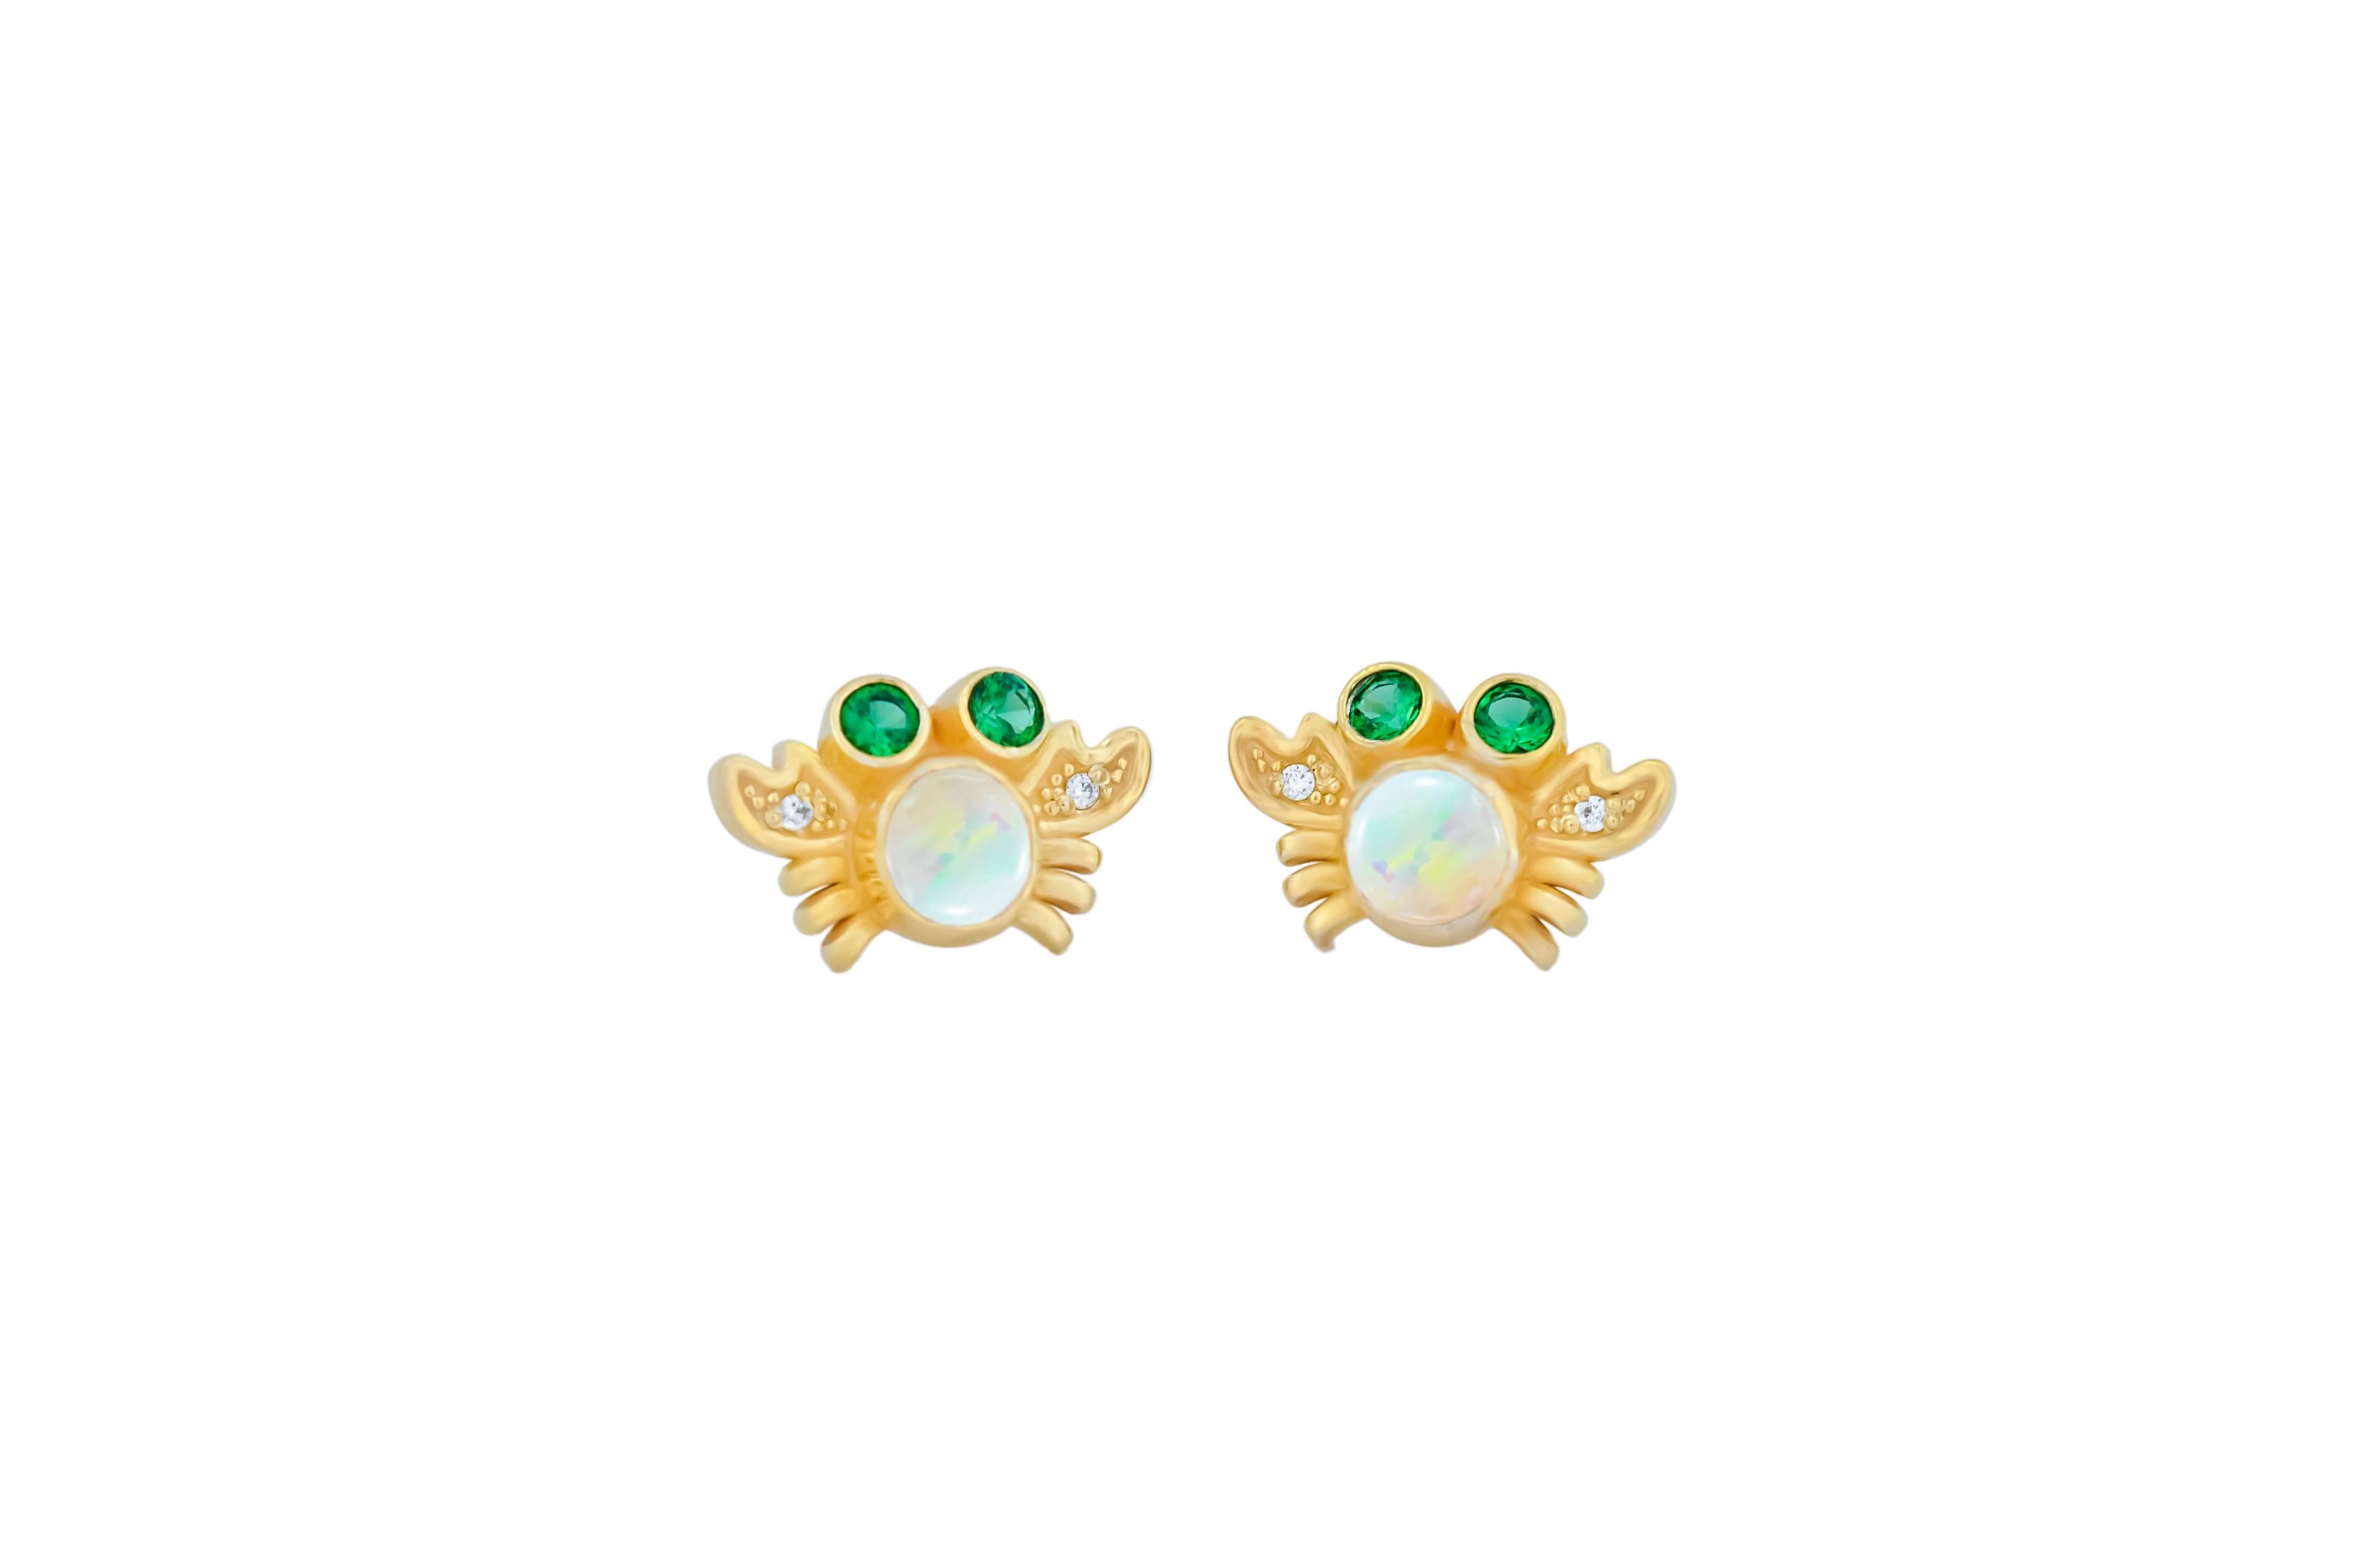 Sea Crab earrings studs with opals in 14k gold. 
Round cabochon opal earrings in 14k gold. Multicolor opal earrings studs.

Earrings:
Metal: 14k gold
Weight: 2.20 g. 
Size:  10x8 mm

Main stone opal, solid , 2 pieces
Opal: color - multicolor
Round